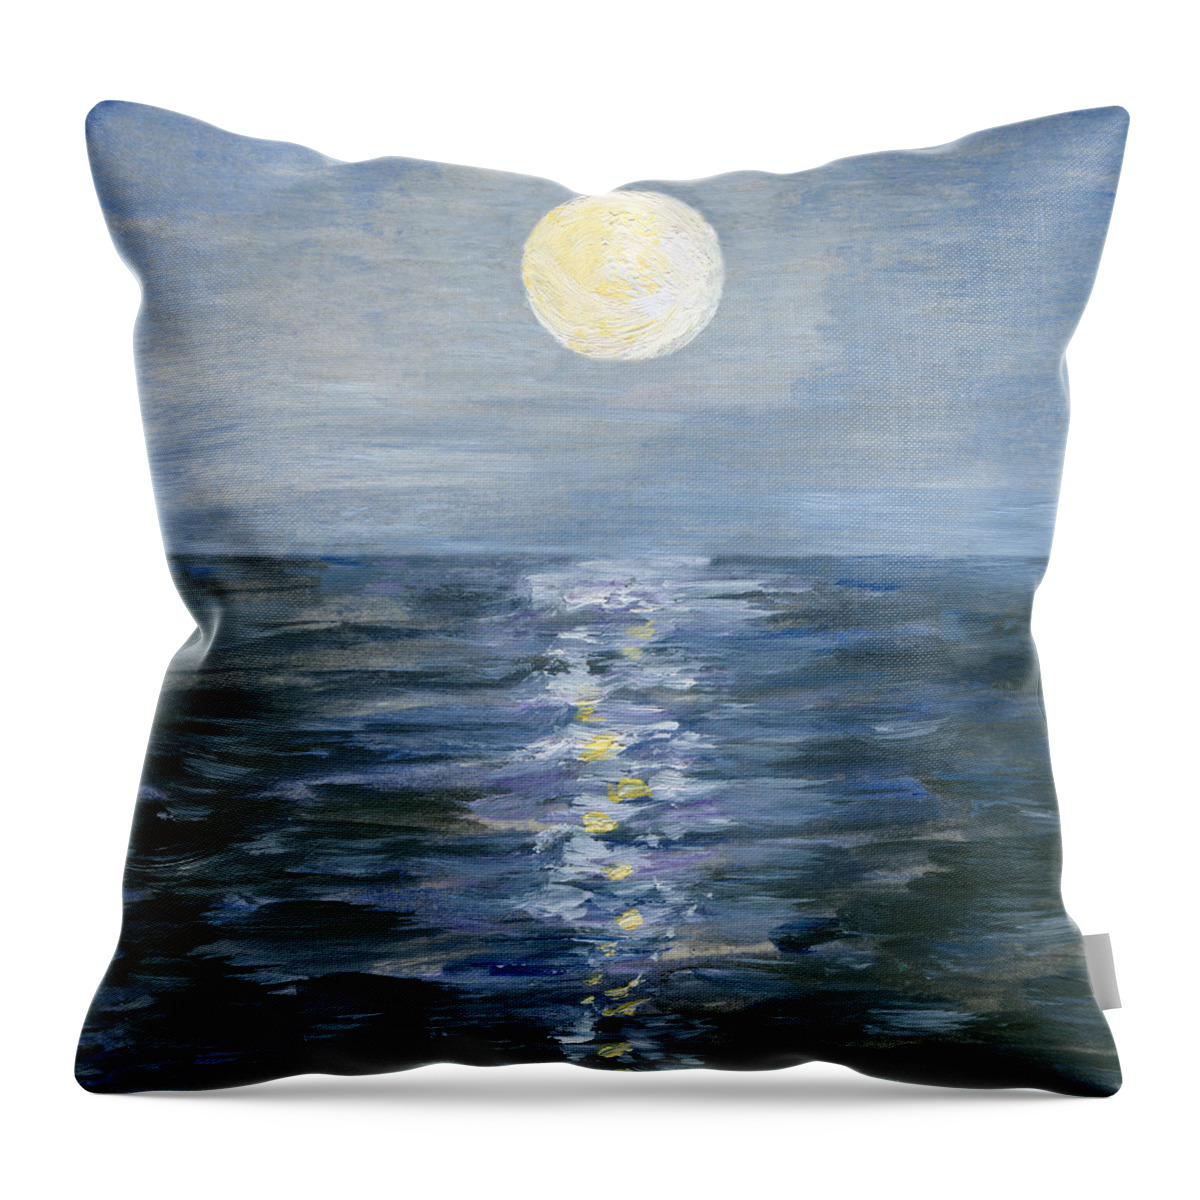 Oil Painting Throw Pillow featuring the digital art Moonlight Reflection In The Sea by Mitza